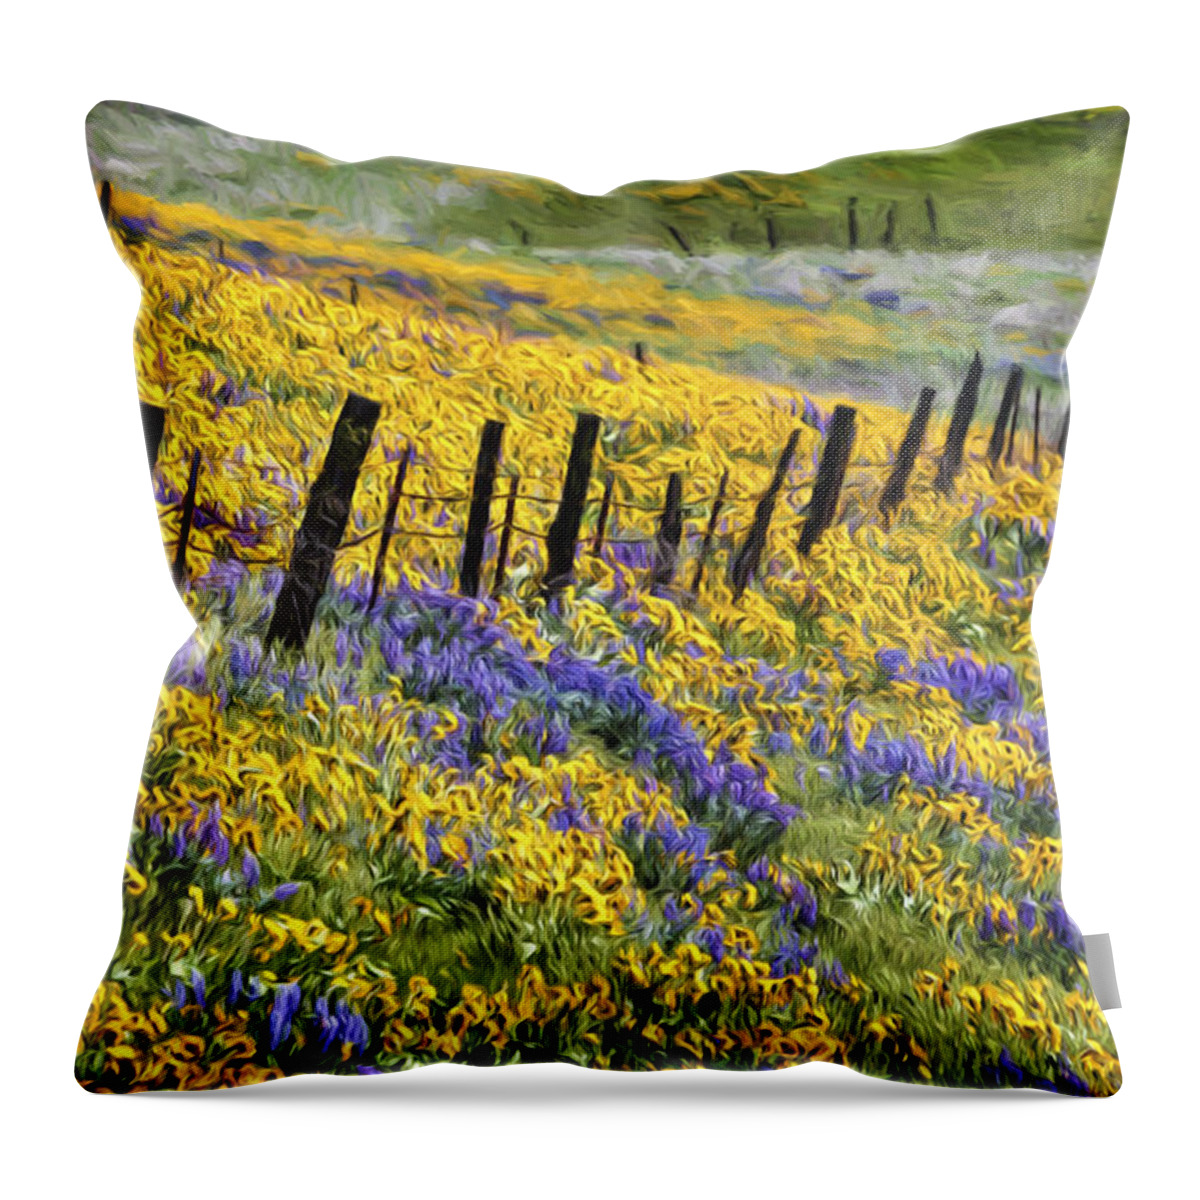 Field Of Gold And Purple Throw Pillow featuring the photograph Field of Gold and Purple by Wes and Dotty Weber